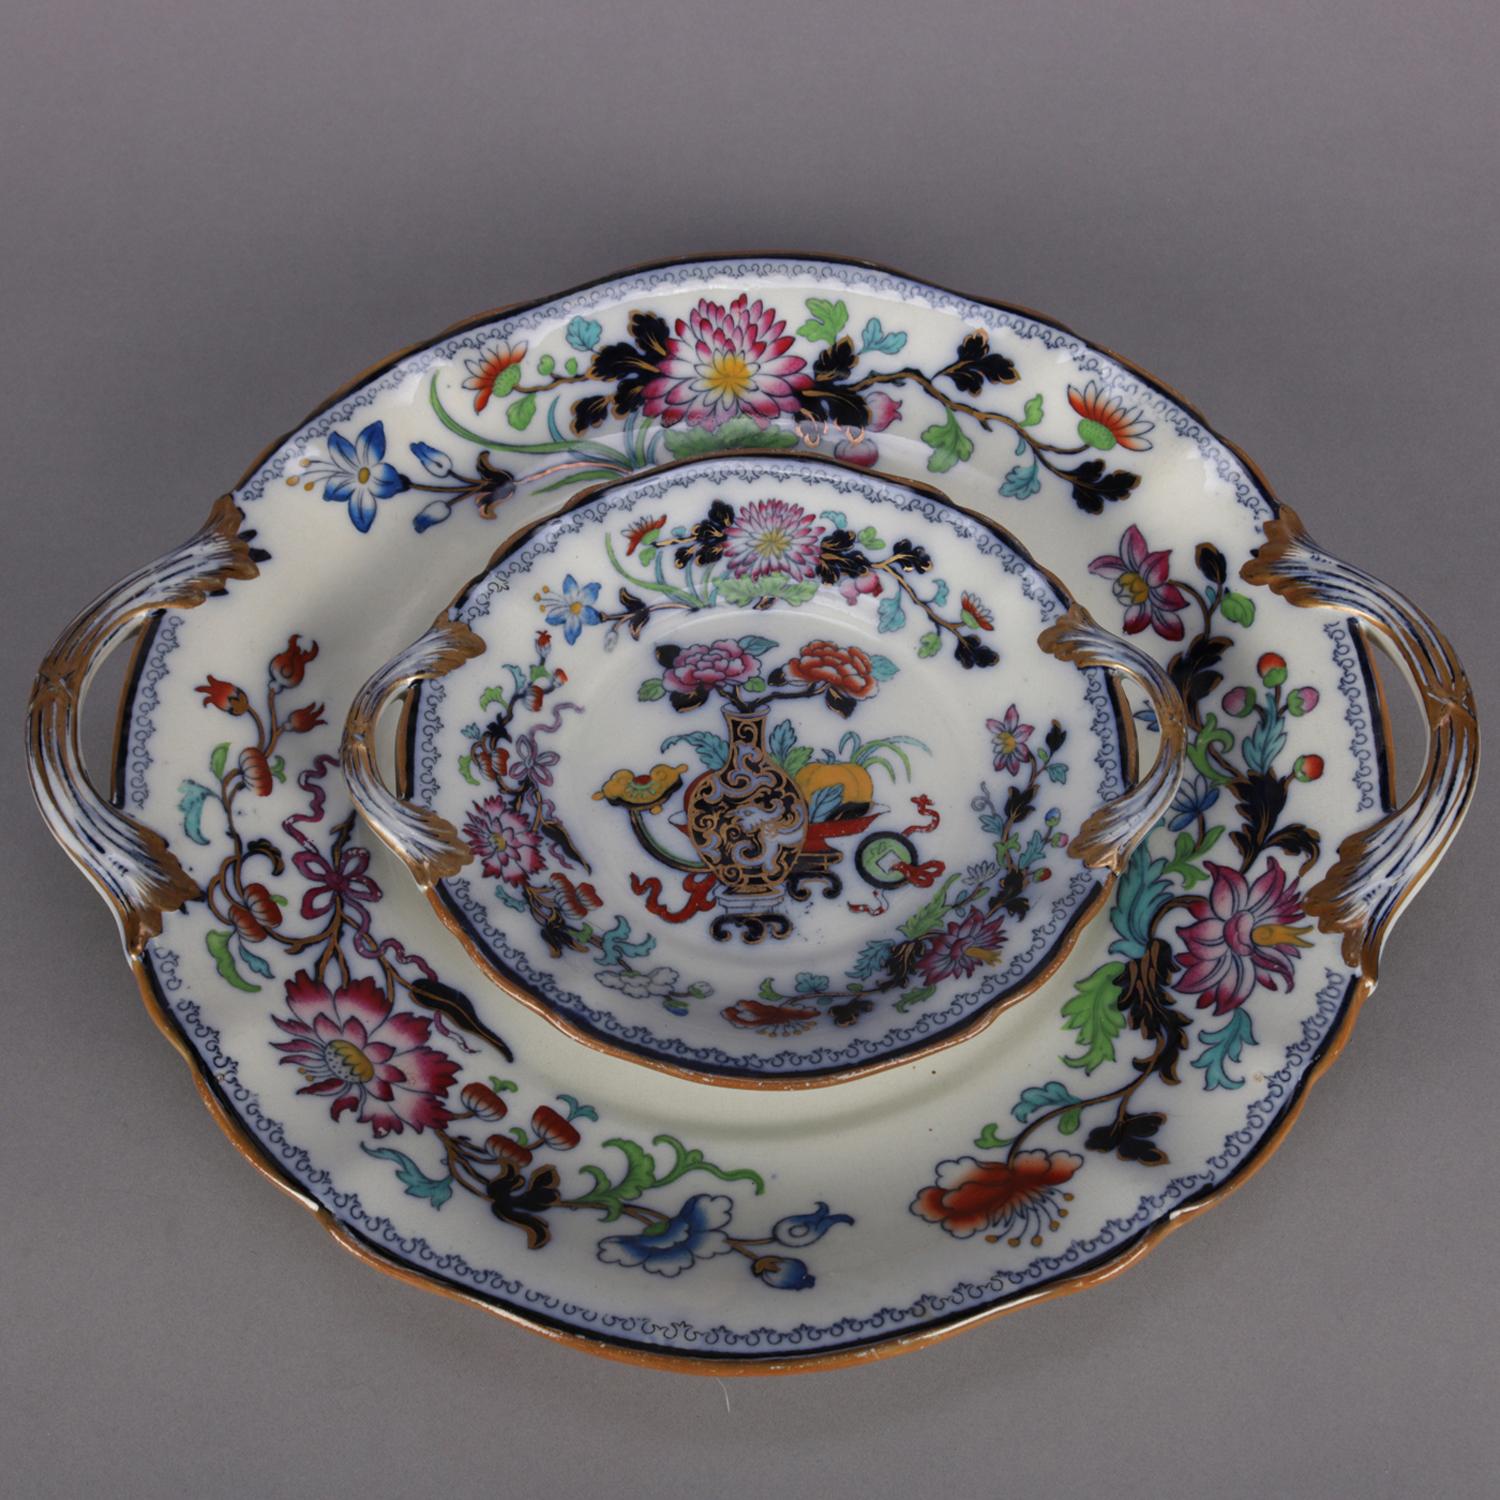 Two antique English Wedgwood Noma pattern ironstone double handle platters feature polychromed, flow blue and gilt Asian floral and urn decoration, one en verso marked NOMA, mid-1800s.

Measures: 1.75